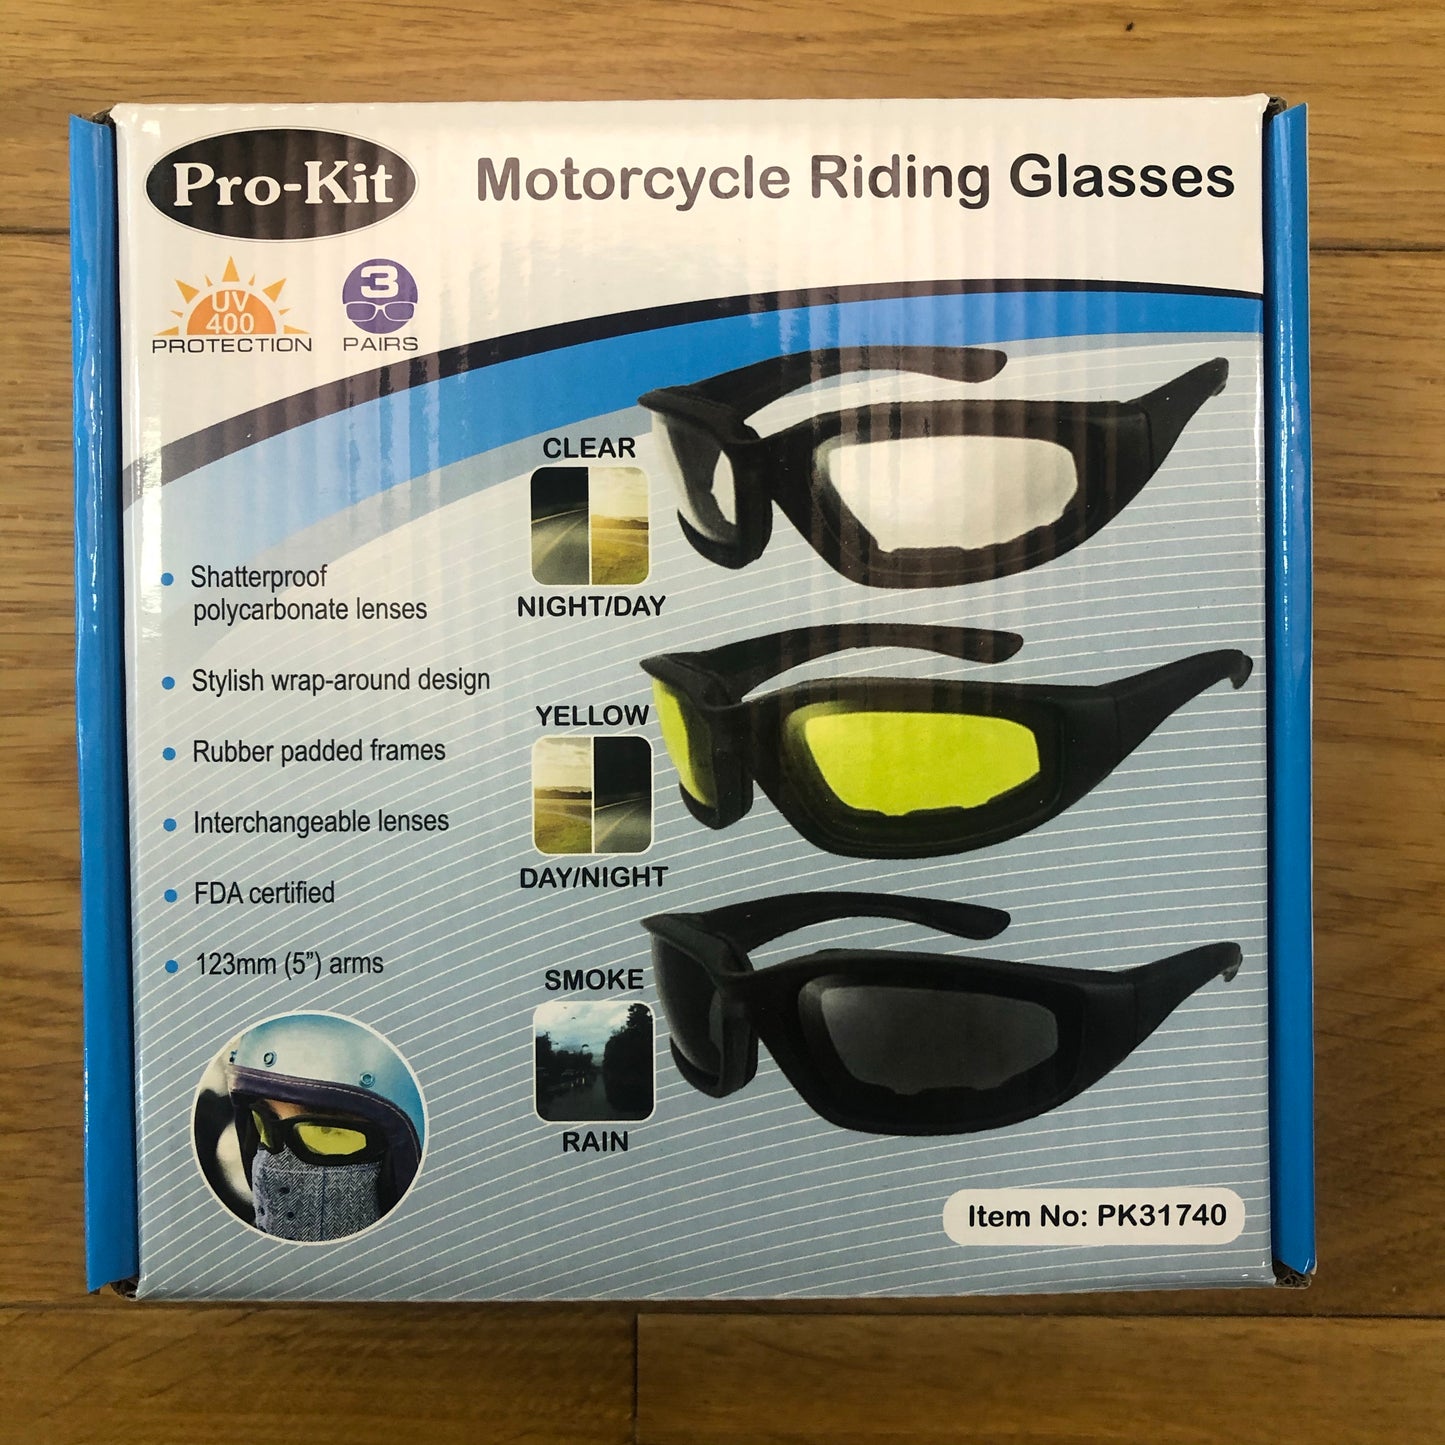 Pro-Kit Motorcycle Riding Glasses - 3 Pack (Clear, Yellow and Smoke Lens)